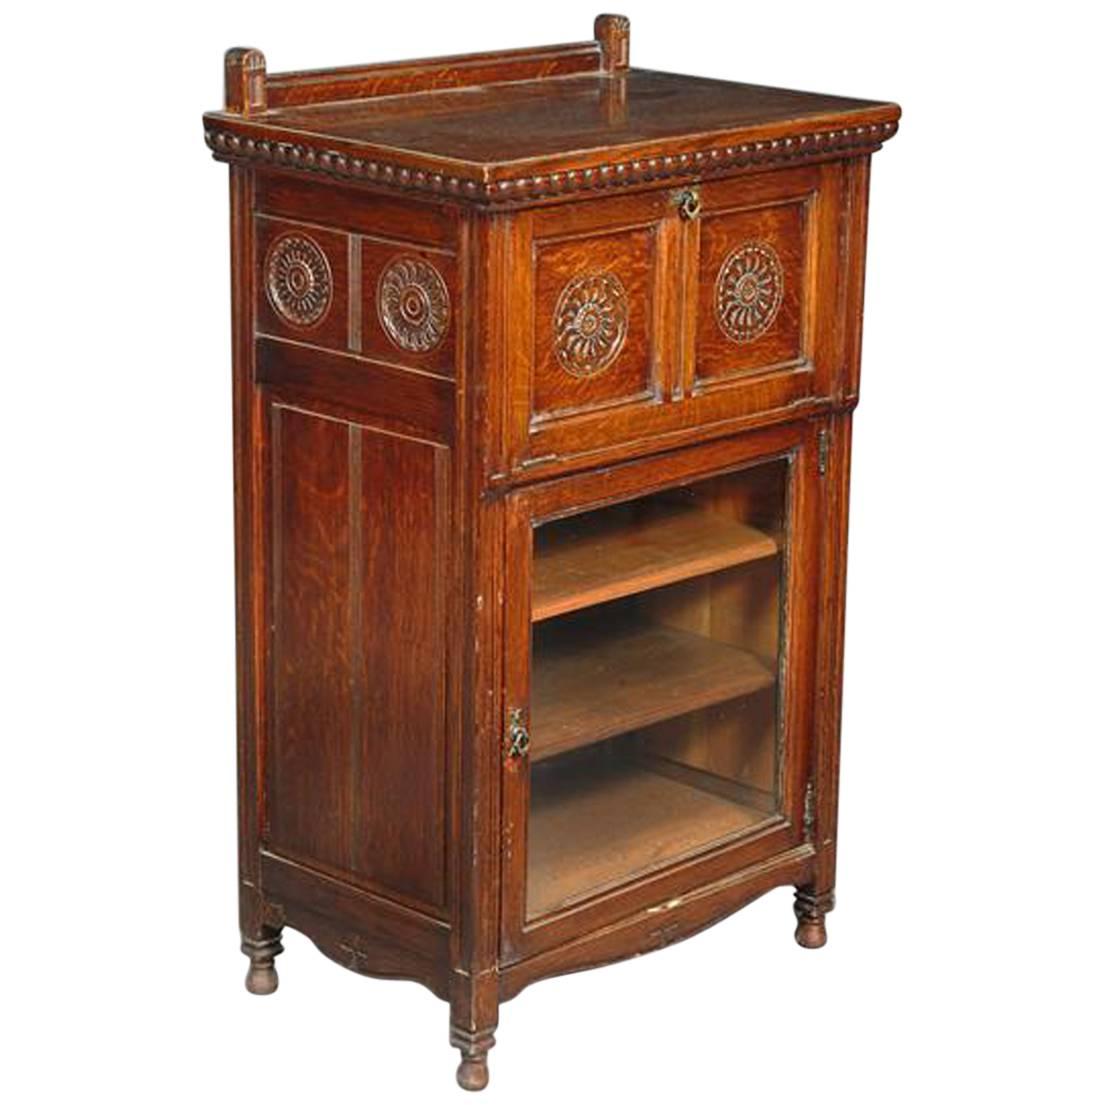 A Gothic Revival Carved Oak Glazed Music Cabinet, designed by B Talbert